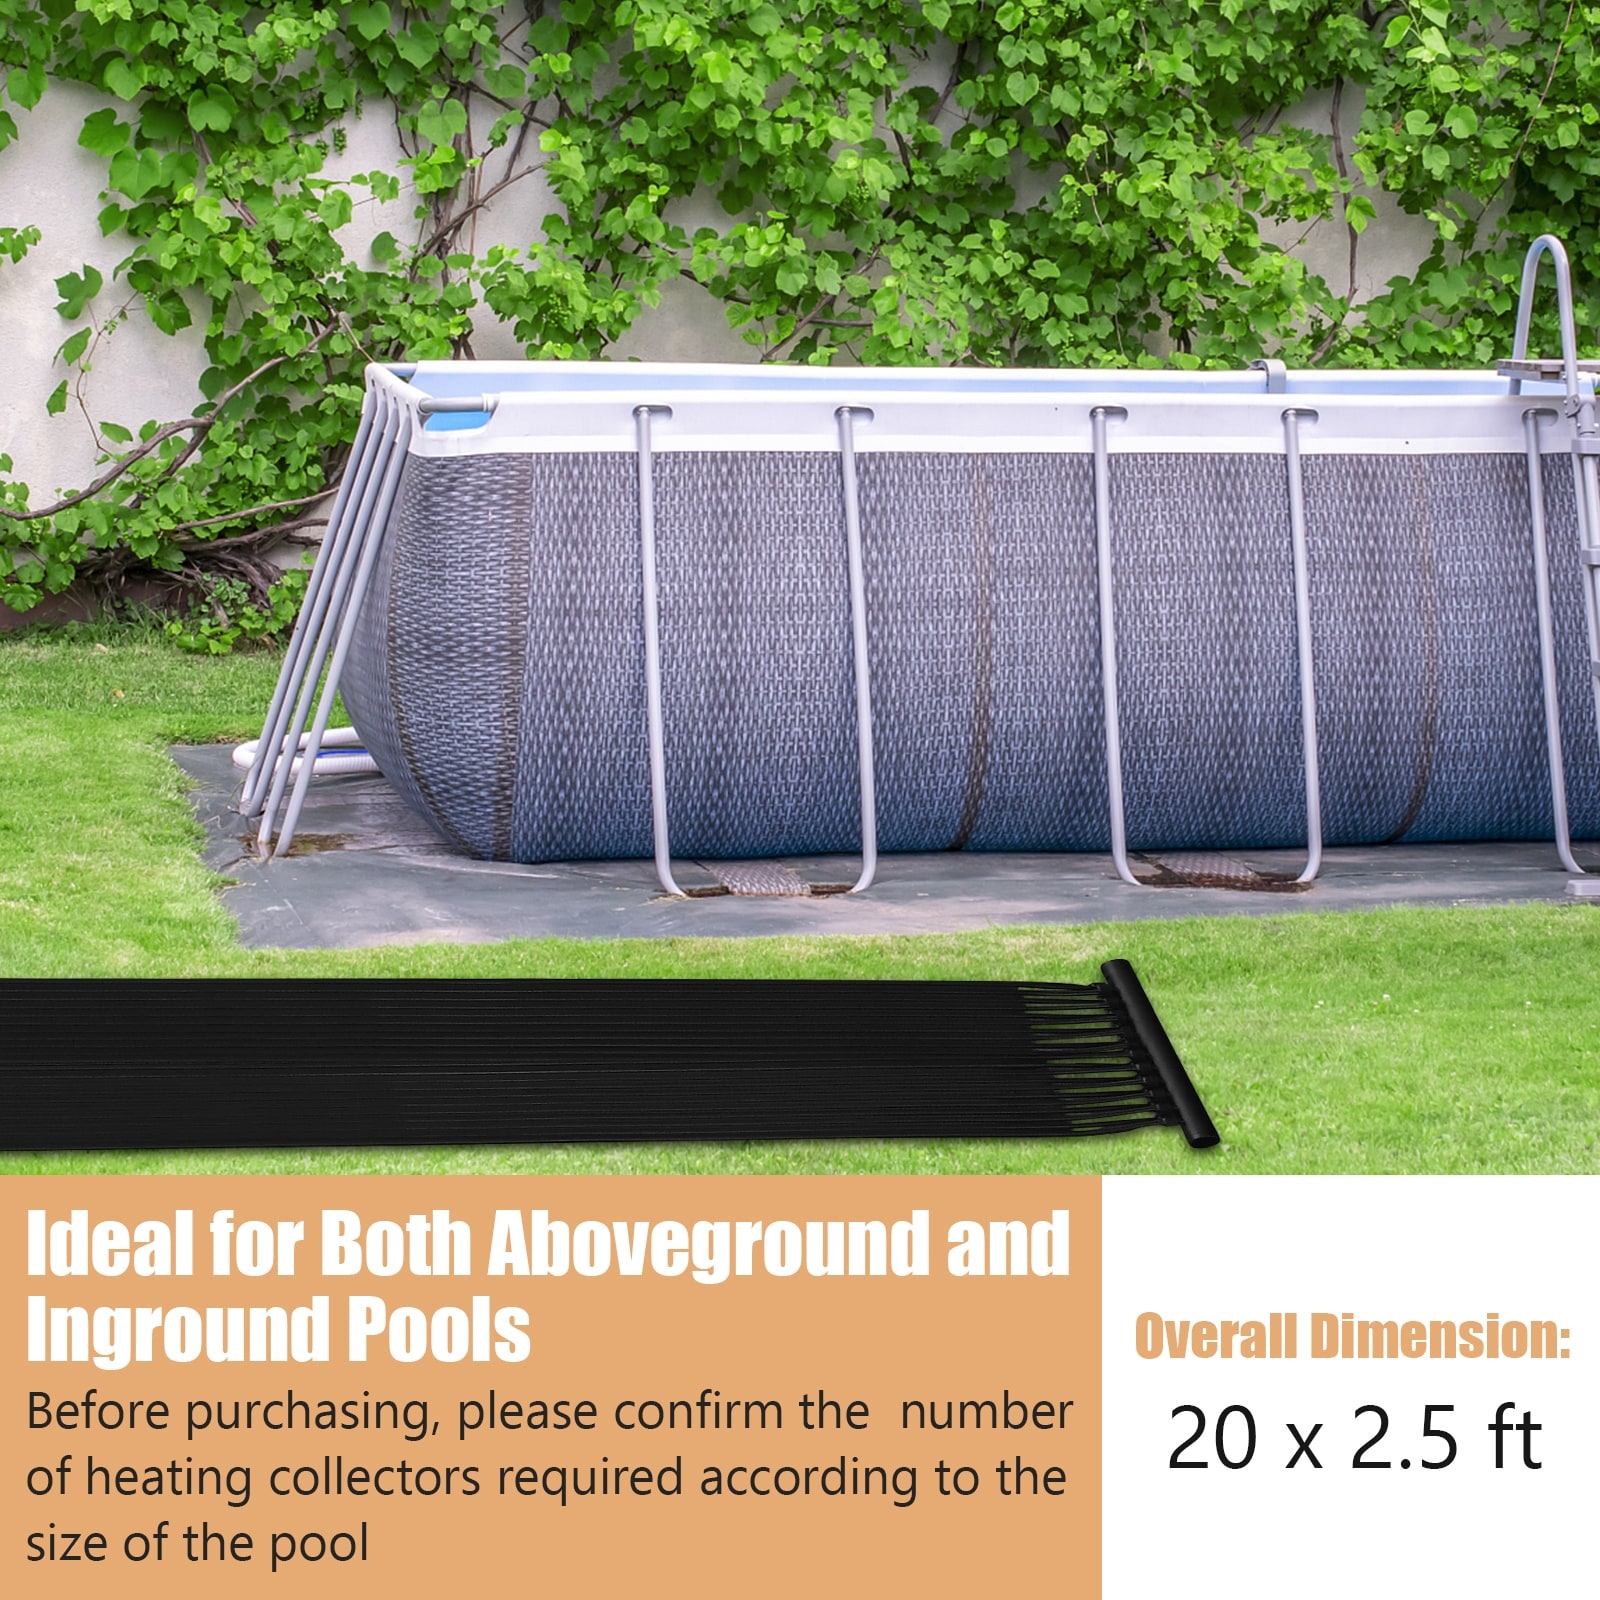 16-Inch IN-Ground Pool Retractable Resin Solar Reel System